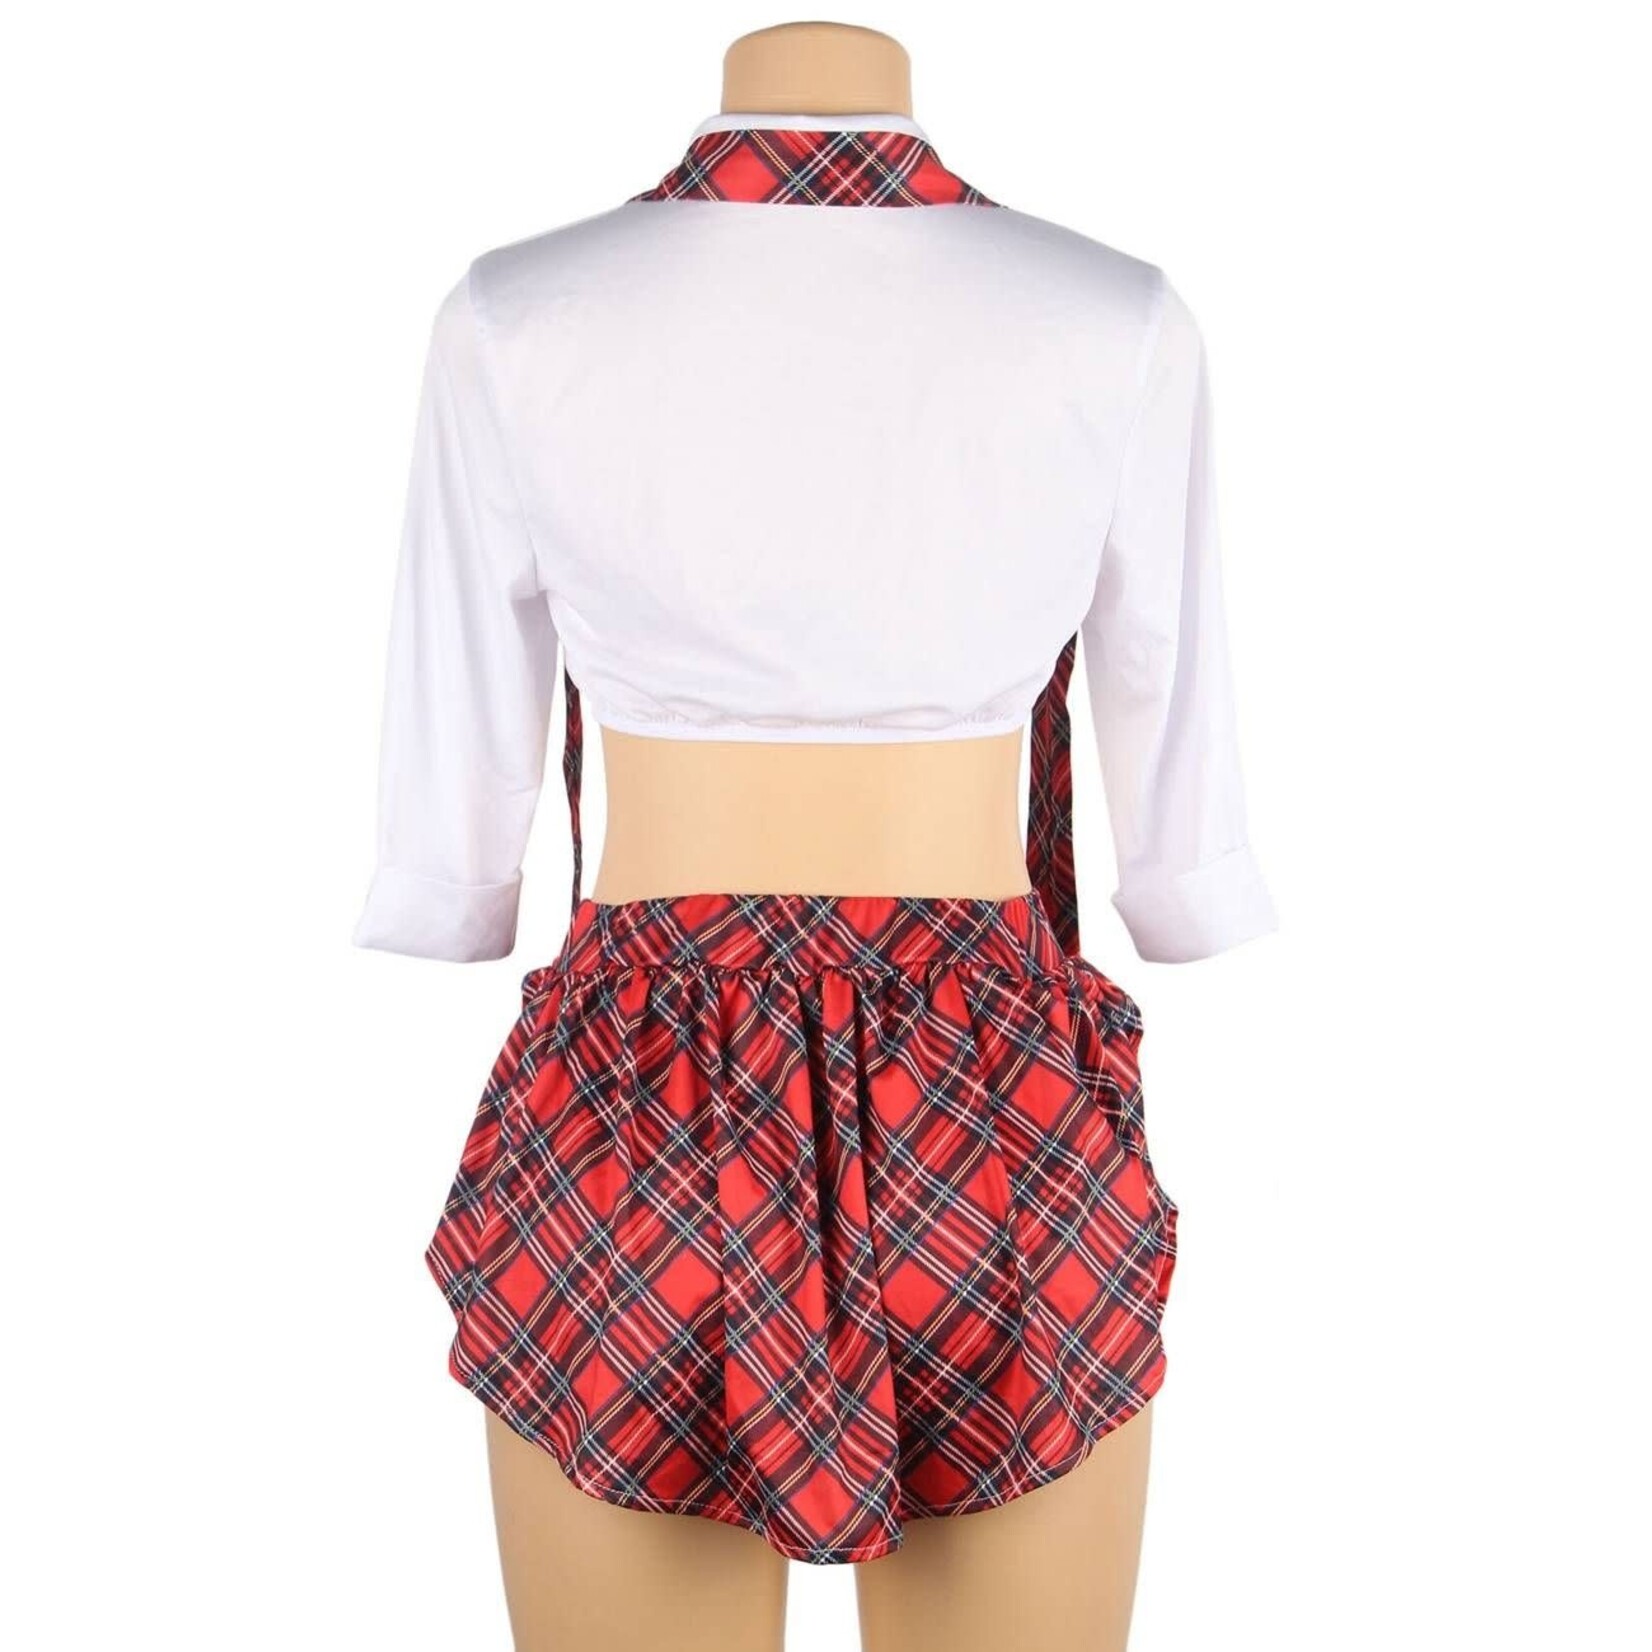 OH YEAH! -  SEXY UNIFORM HIGH-QUALITY STUDENT COLLEGE STYLE COSPLAY SUIT XS-S